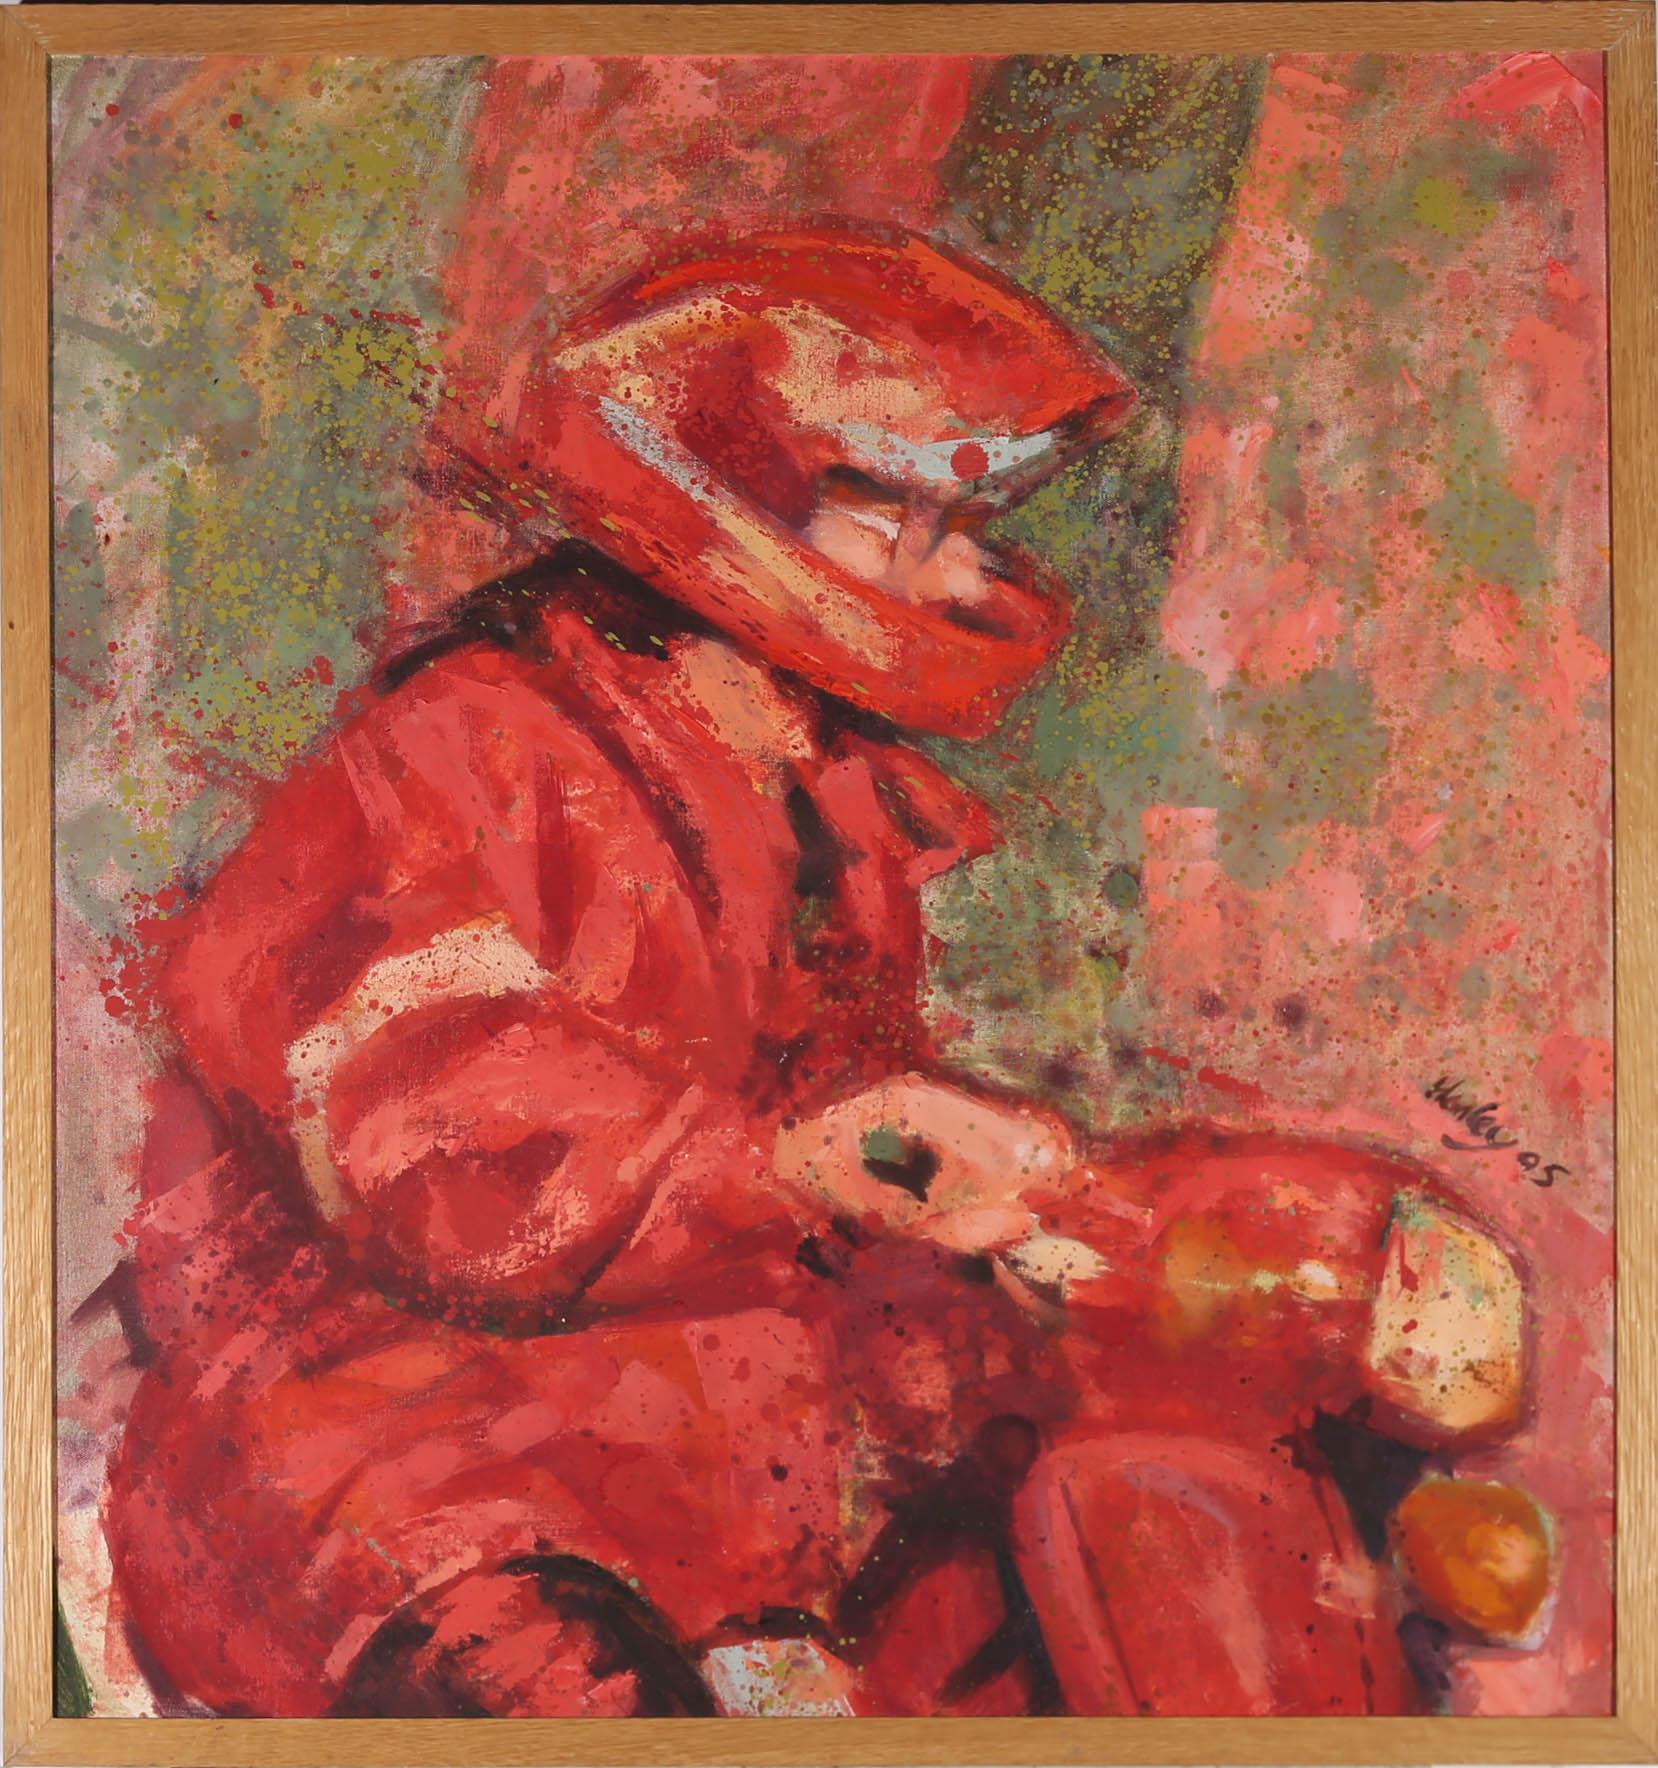 A striking study of a man dressed in red speeding past ona motorbike. The artist captures the movement in the scene through using sweeping, gestural brushworks giving the work an expressive finish. Signed and dated to the right hand side. On canvas